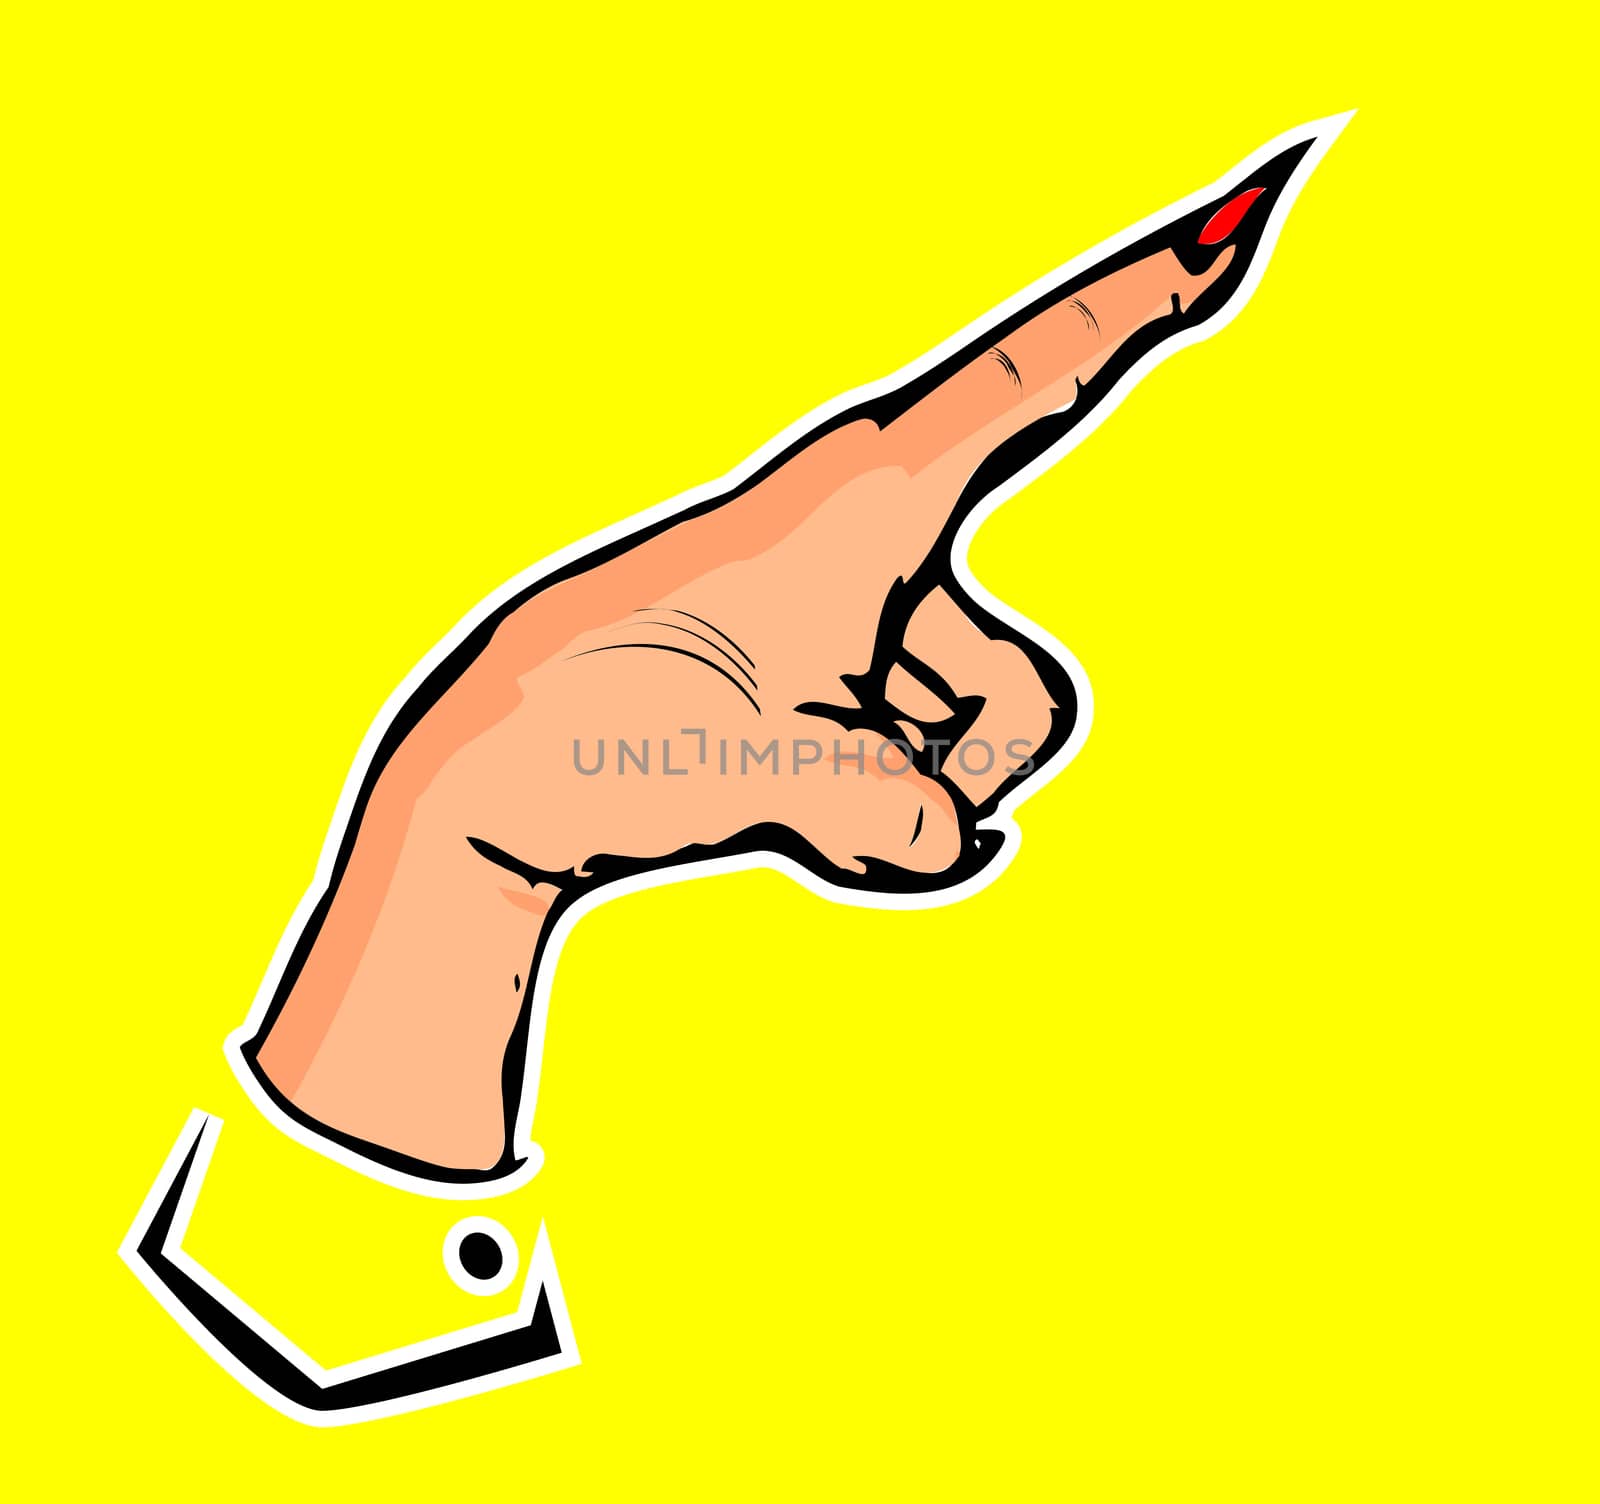 Pointing hand - Retro Clip Art popart comics style from collecti by IconsJewelry